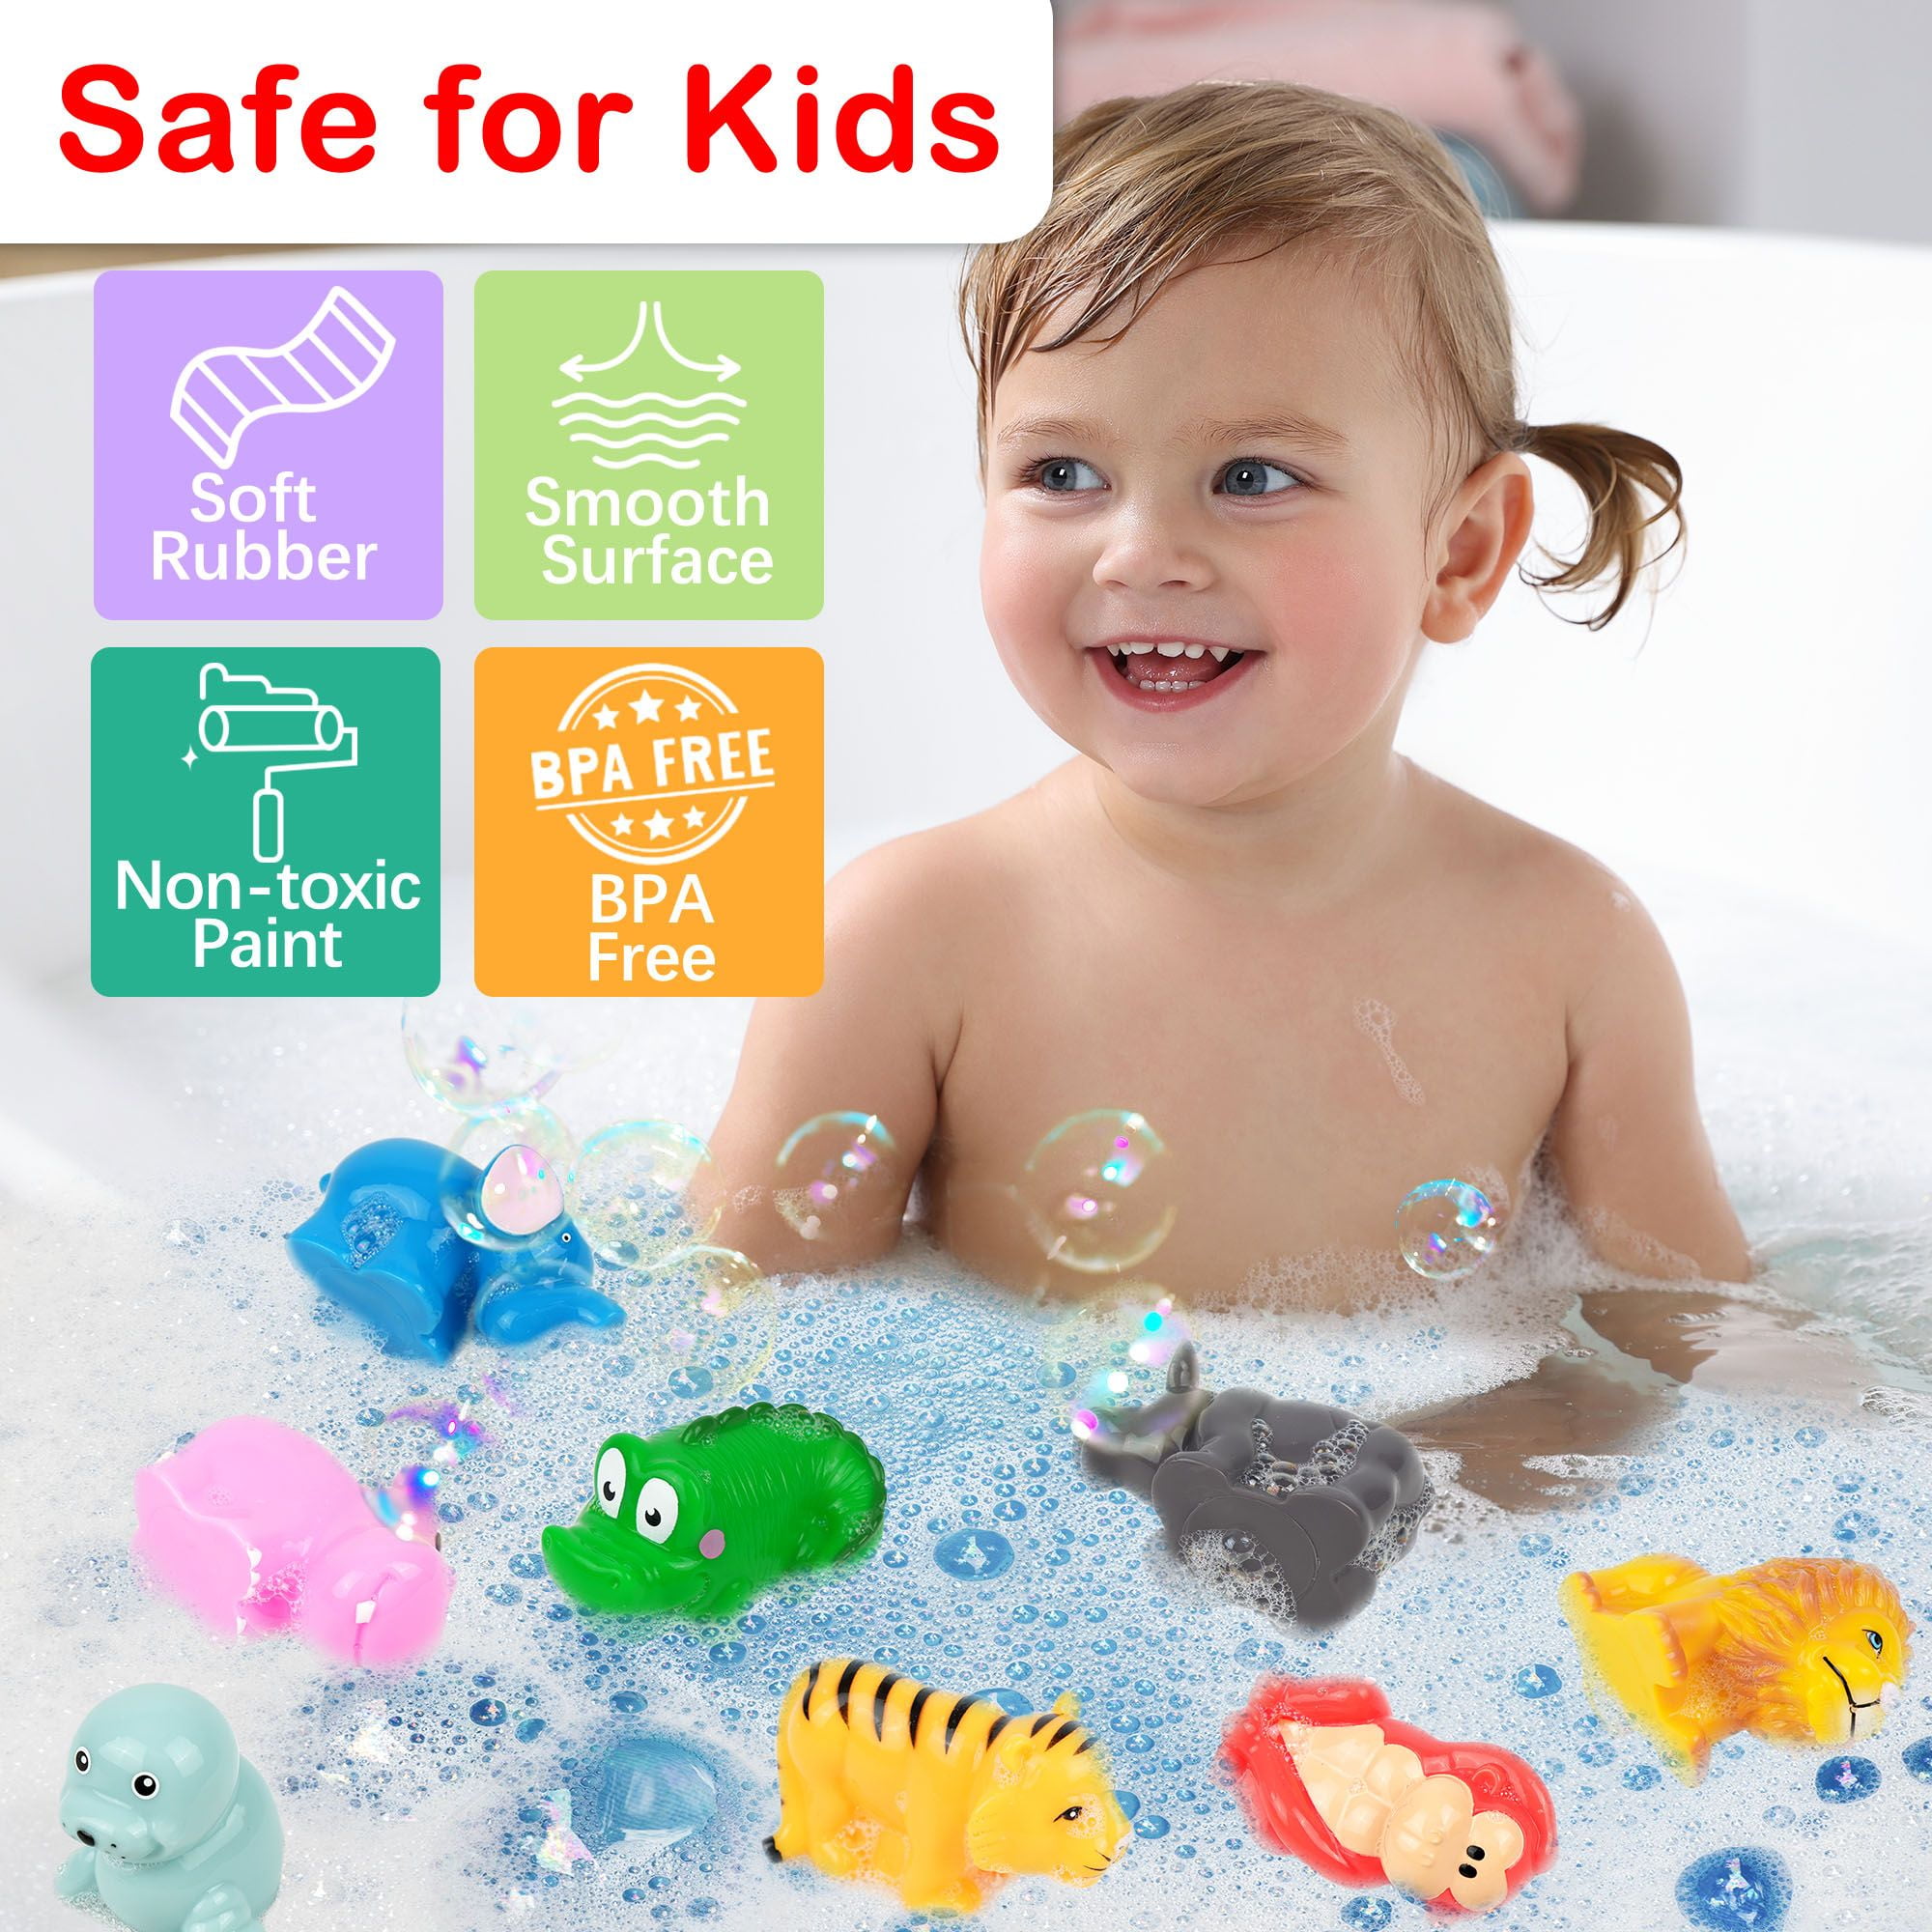  LotFancy Bath Toys for Toddlers 1-3, Mold Free Bathtub Toys for  Infants 6-12 Months, 8PCS No Holes Ocean Sea Animal Bath Toys for Kids Ages  4-8 : Toys & Games